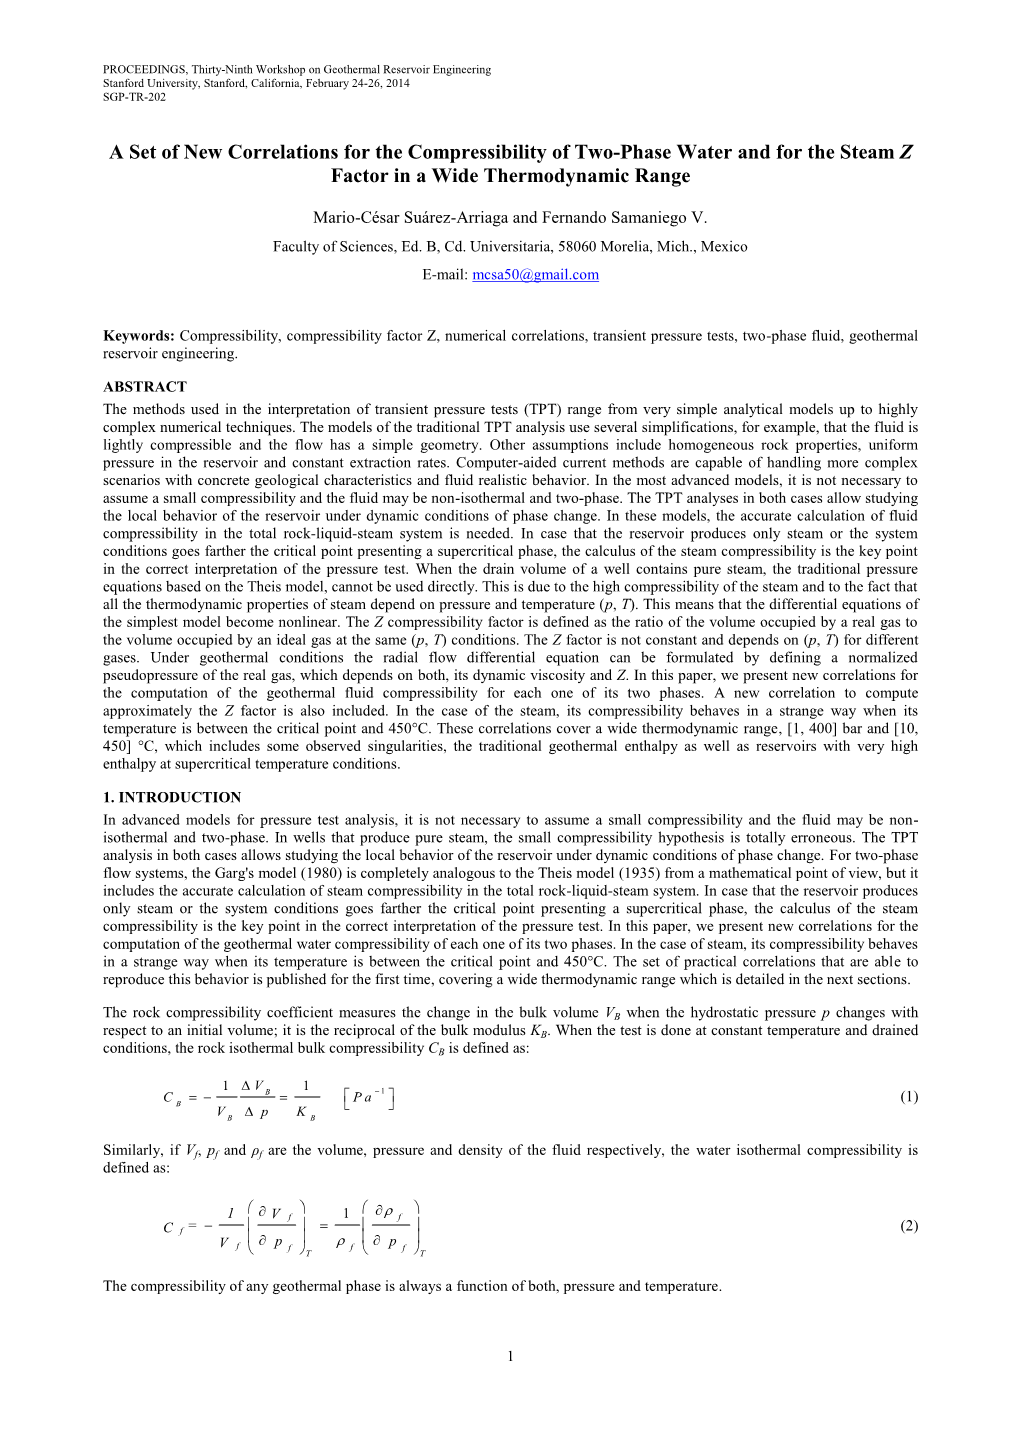 A Set of New Correlations for the Compressibility of Two-Phase Water and for the Steam Z Factor in a Wide Thermodynamic Range